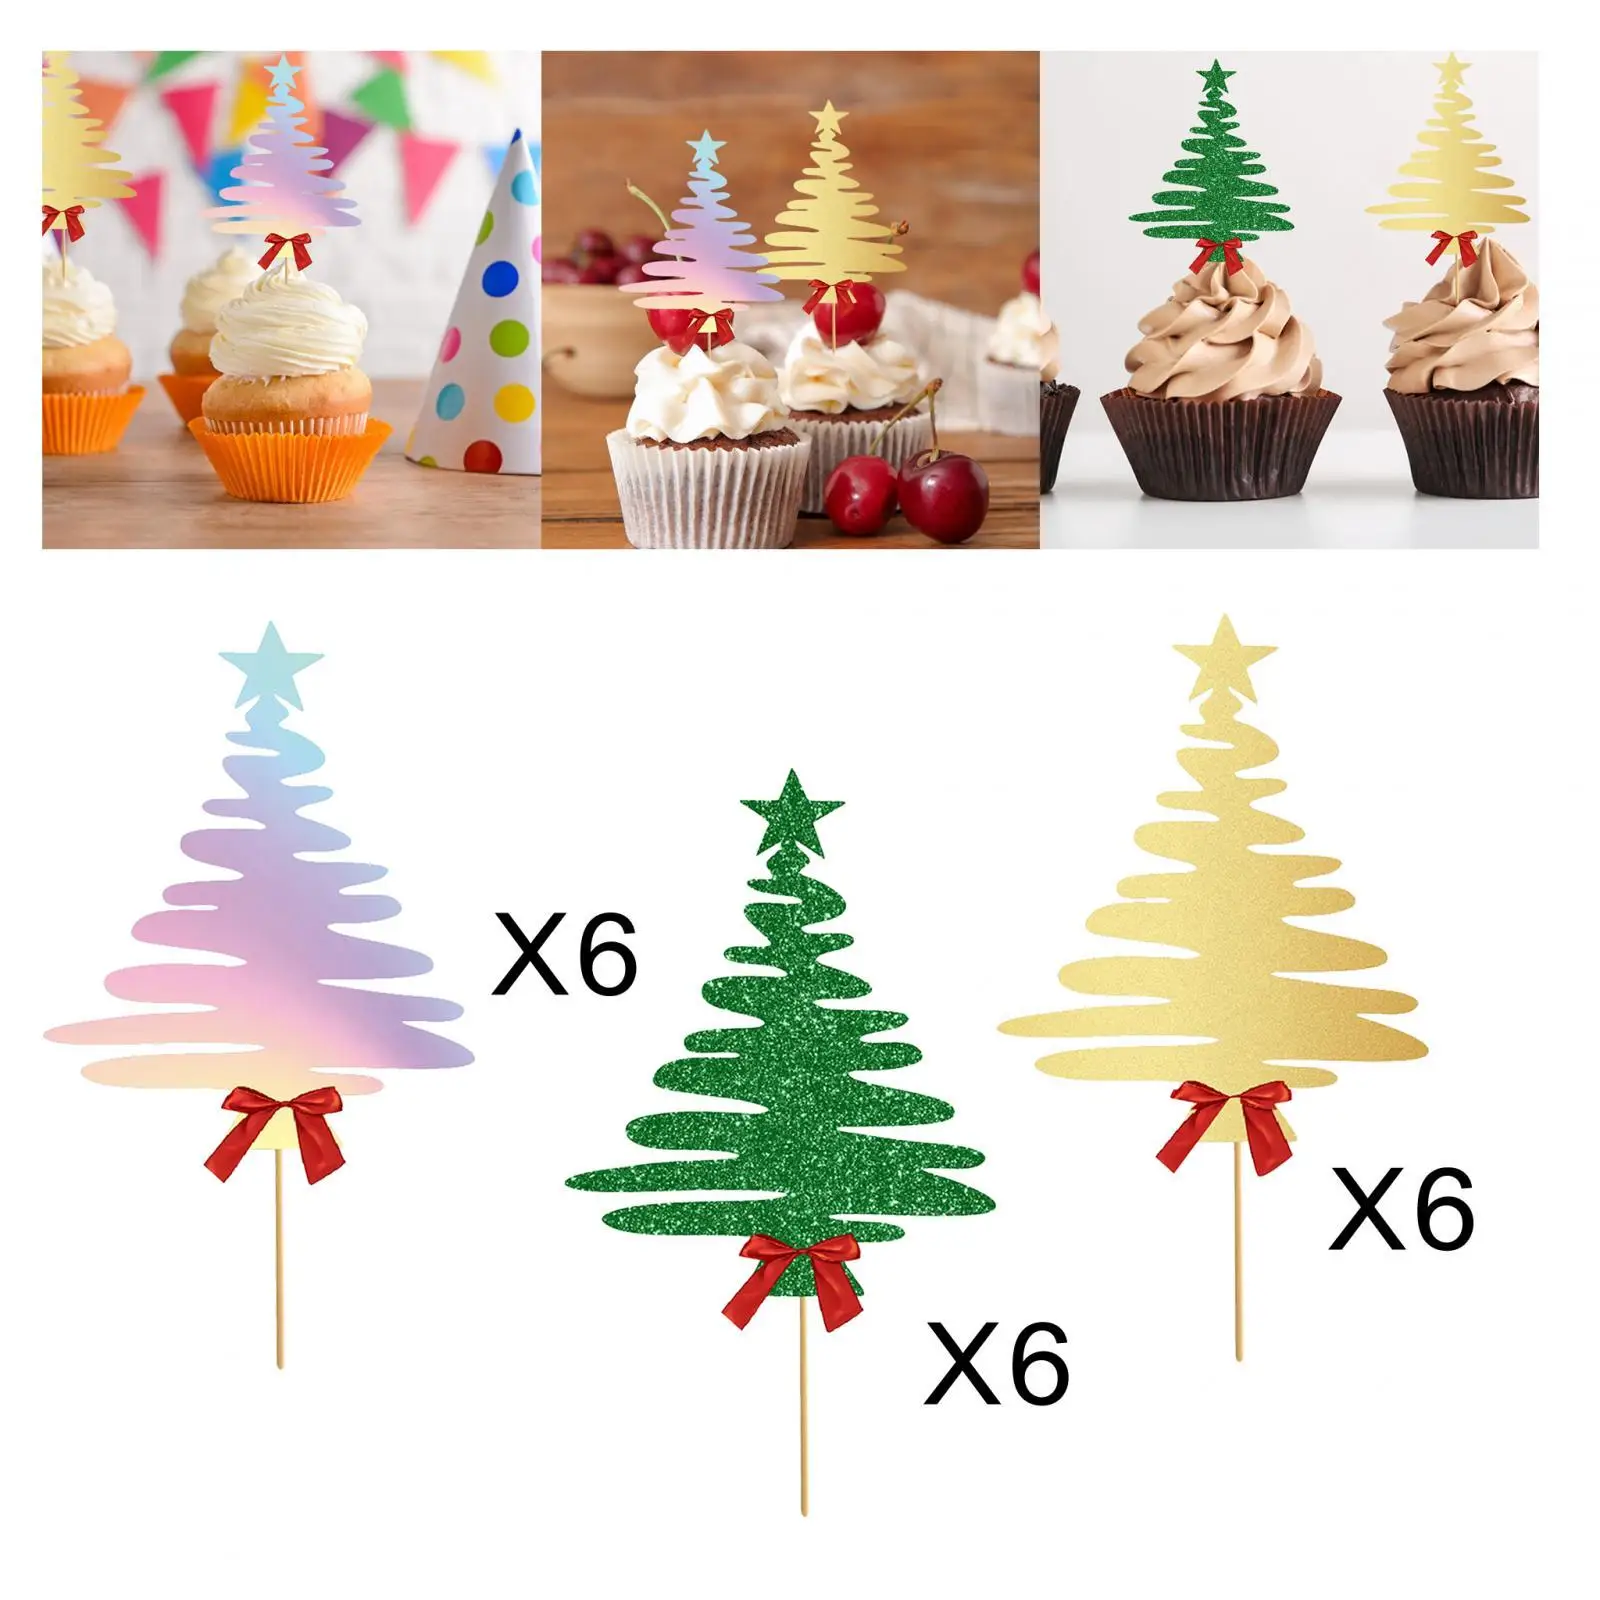 18 Pieces Christmas Cupcake Toppers Cake Toppers Christmas Tree Cupcake Picks for Birthday Wedding Baby Shower Party Favors